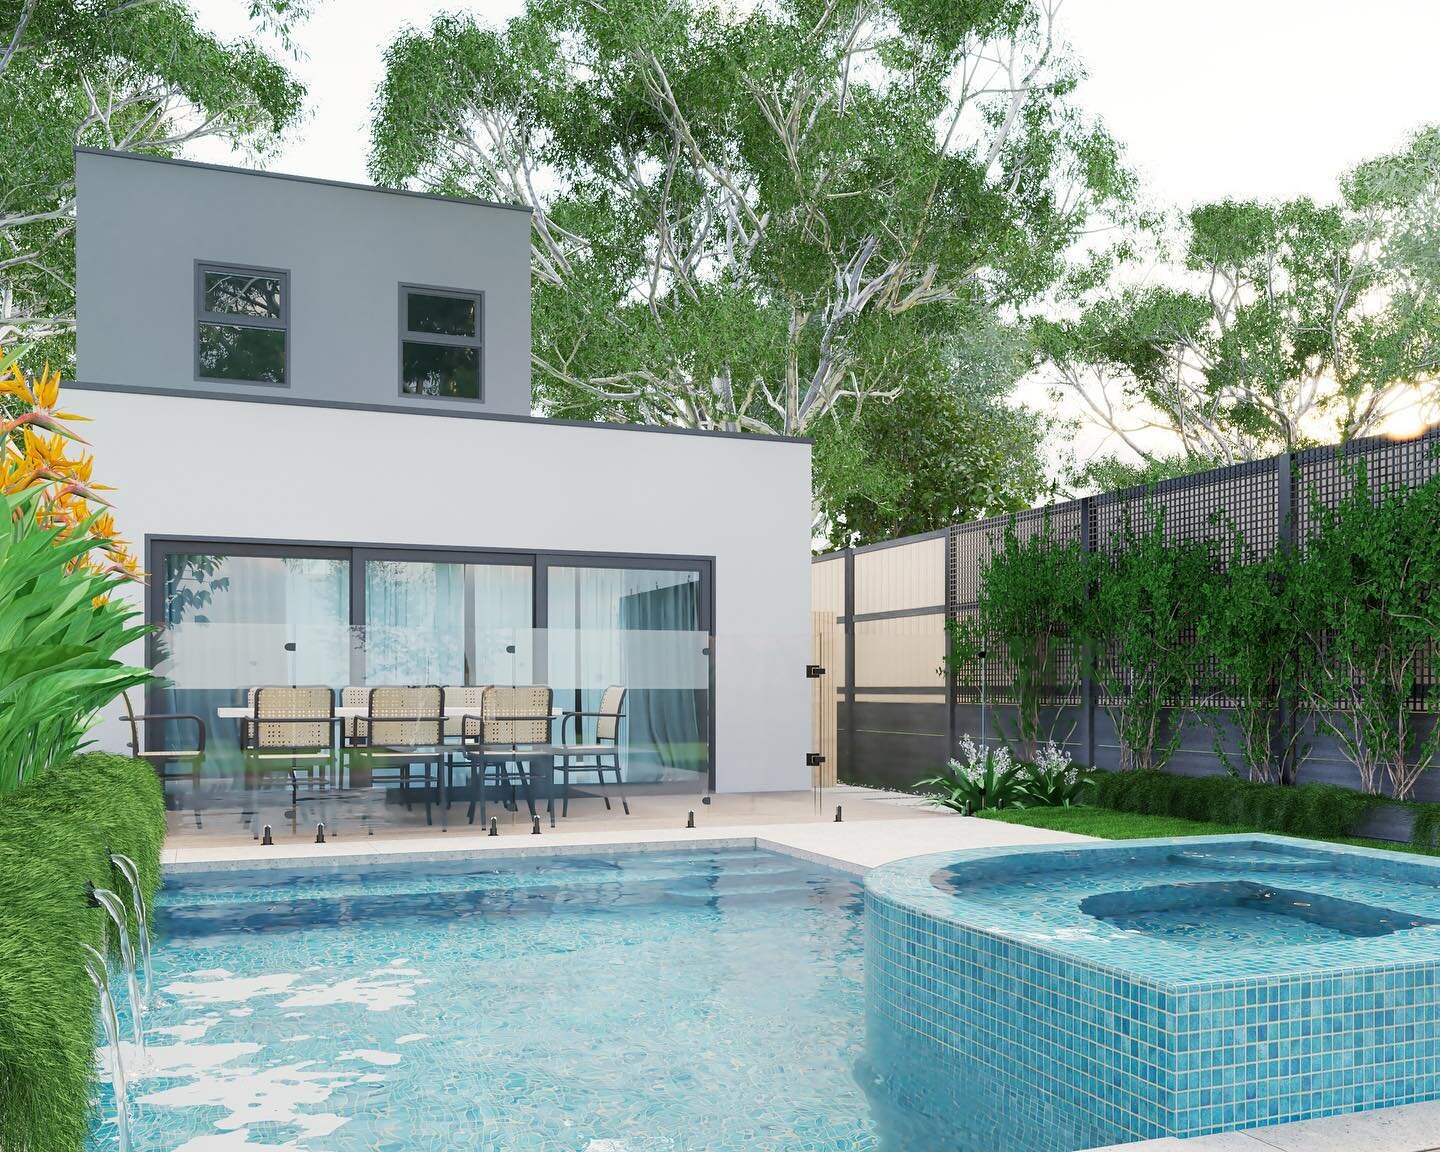 Love this backyard! Trying out a new software as well 🥸 designed by @landart_landscapes and 3D by @hanna_digital_design #backyardgarden #backyarddesign #gardendesign #pooldesign #poolparty #newdesign #skills #getonboard #melbournedesign #melbournear